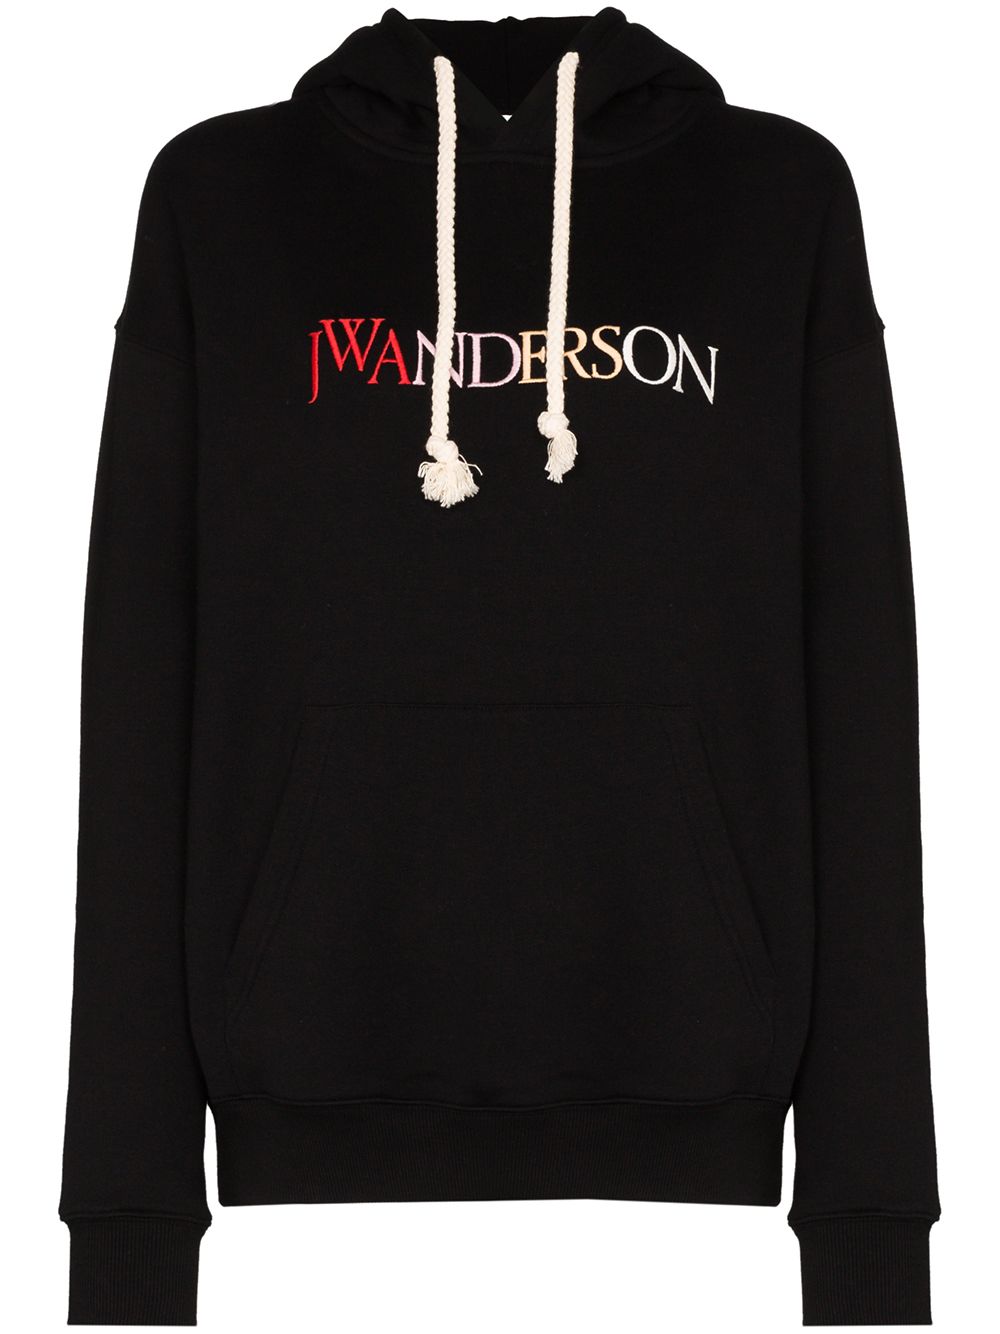 JW ANDERSON LOGO EMBROIDERED HOODIE